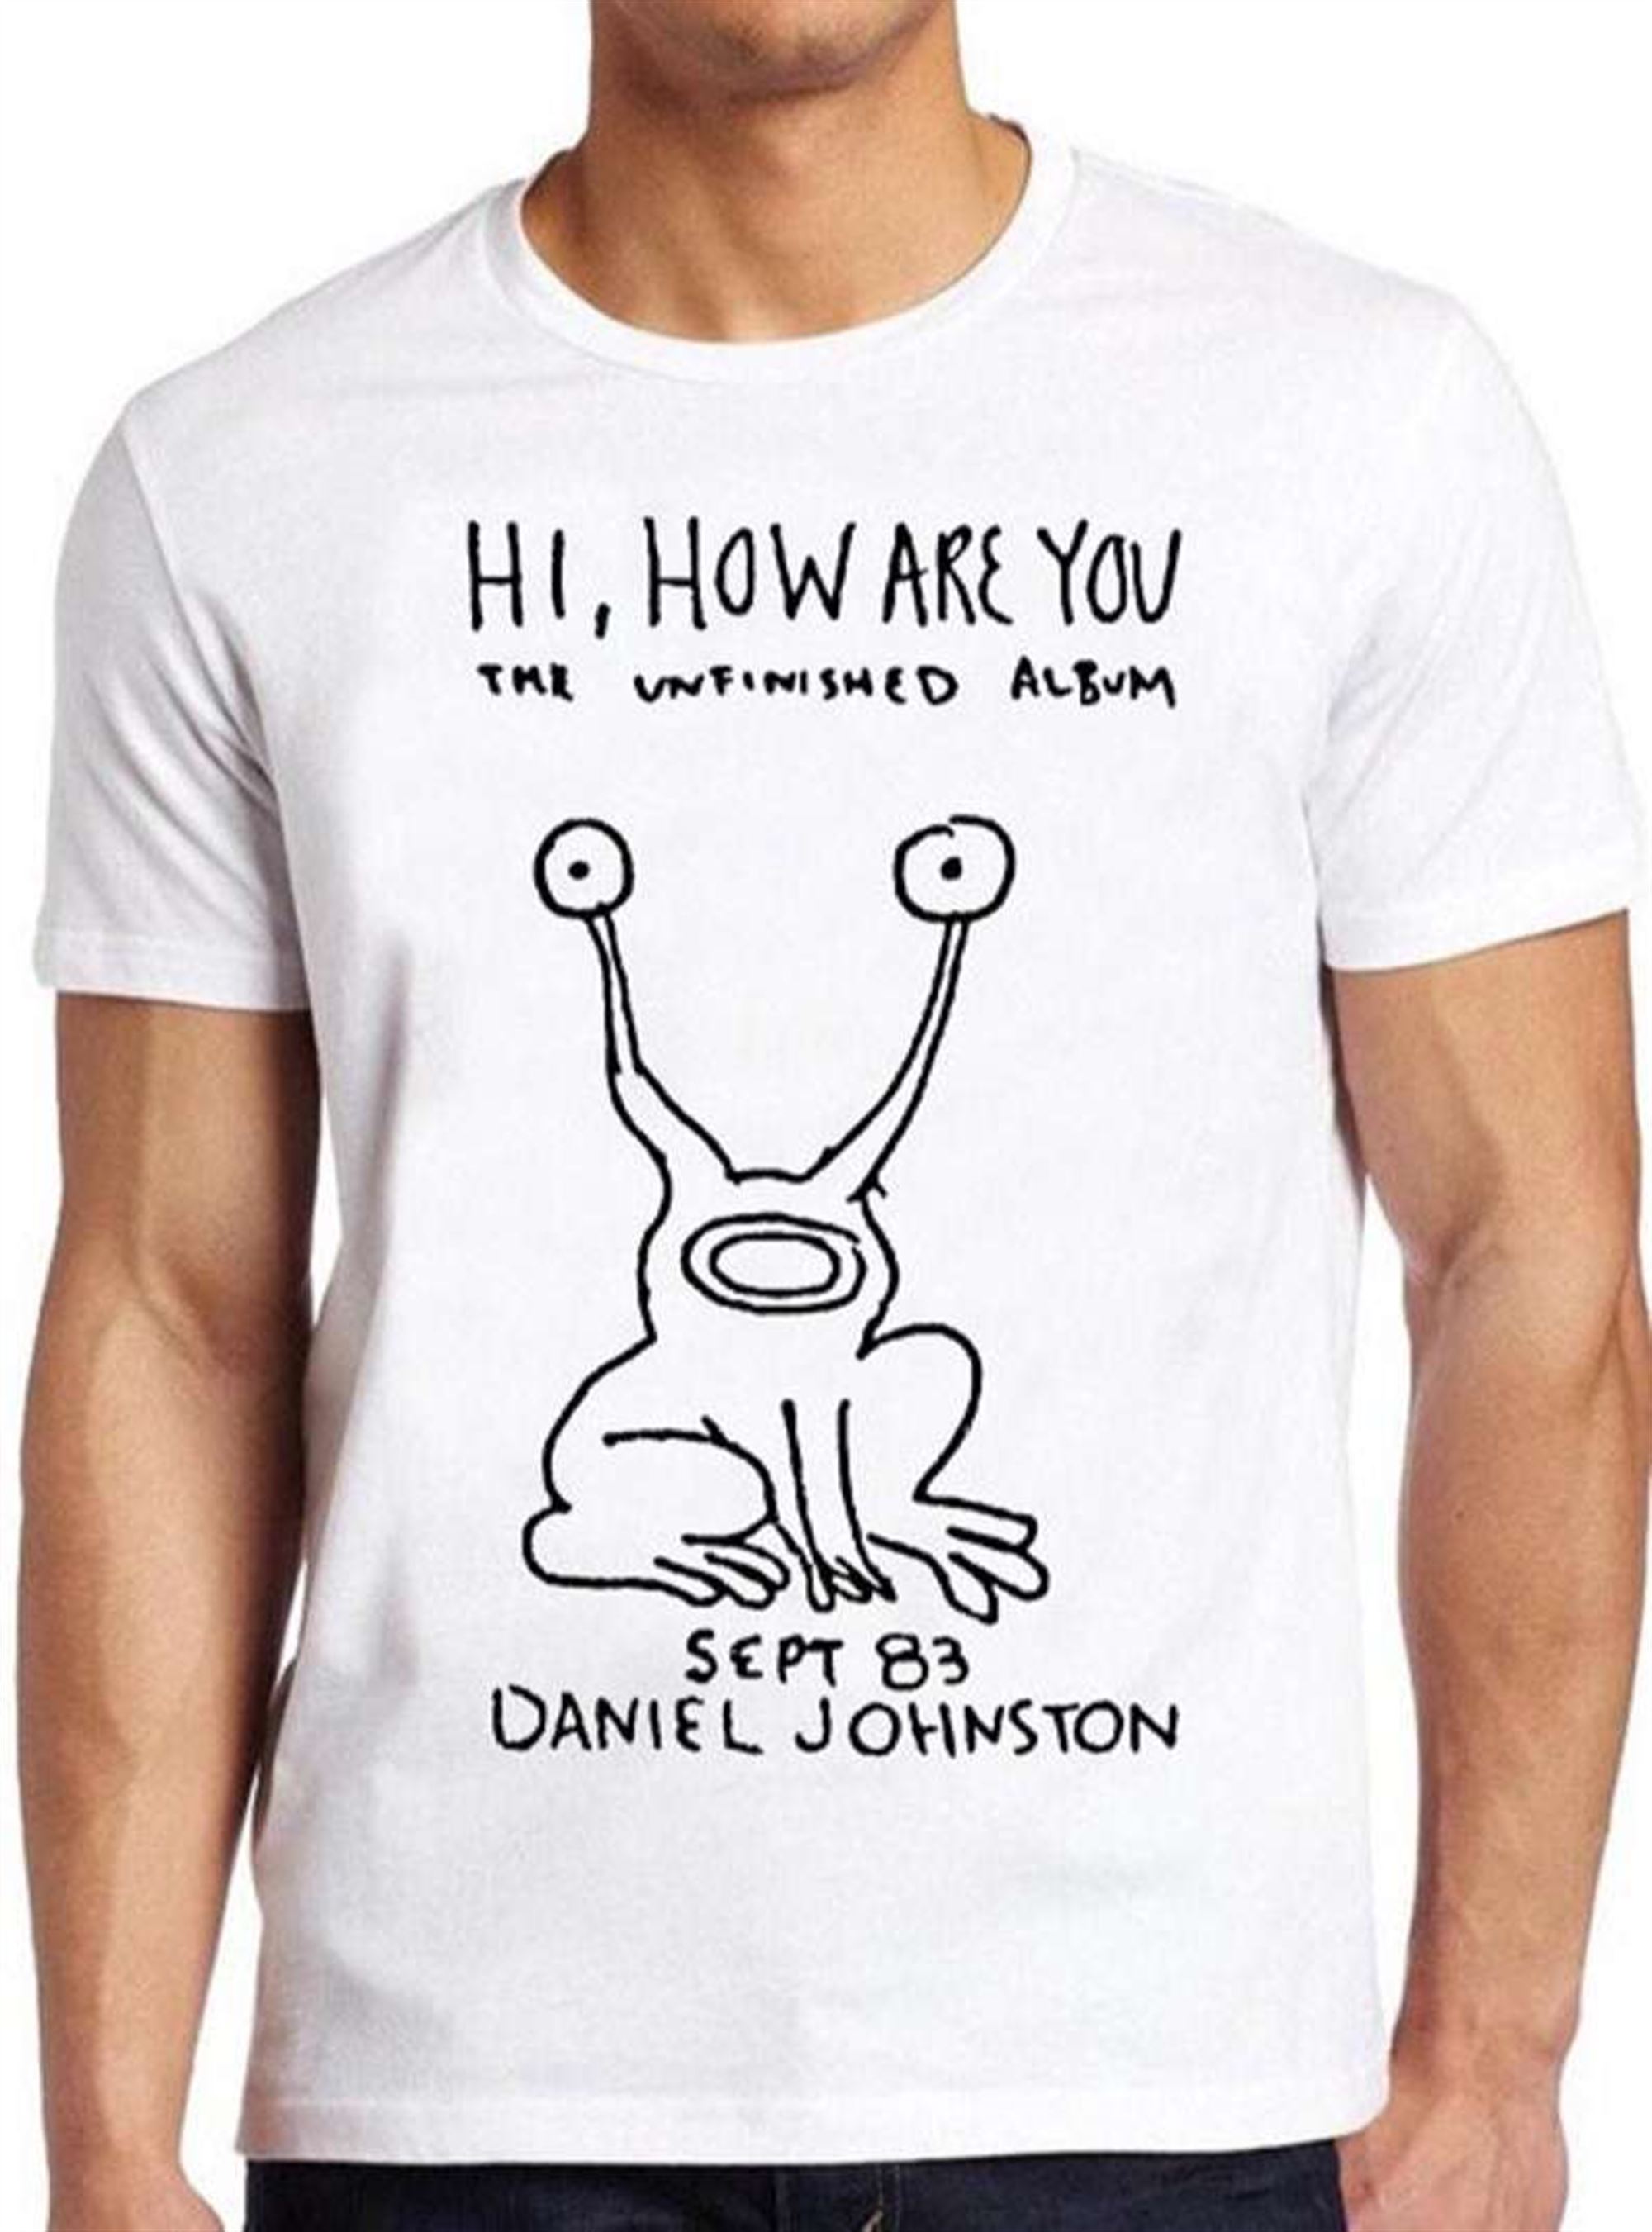 Daniel Johnston T Shirt Hi How Are You Music 80s Full Size Up To 5xl